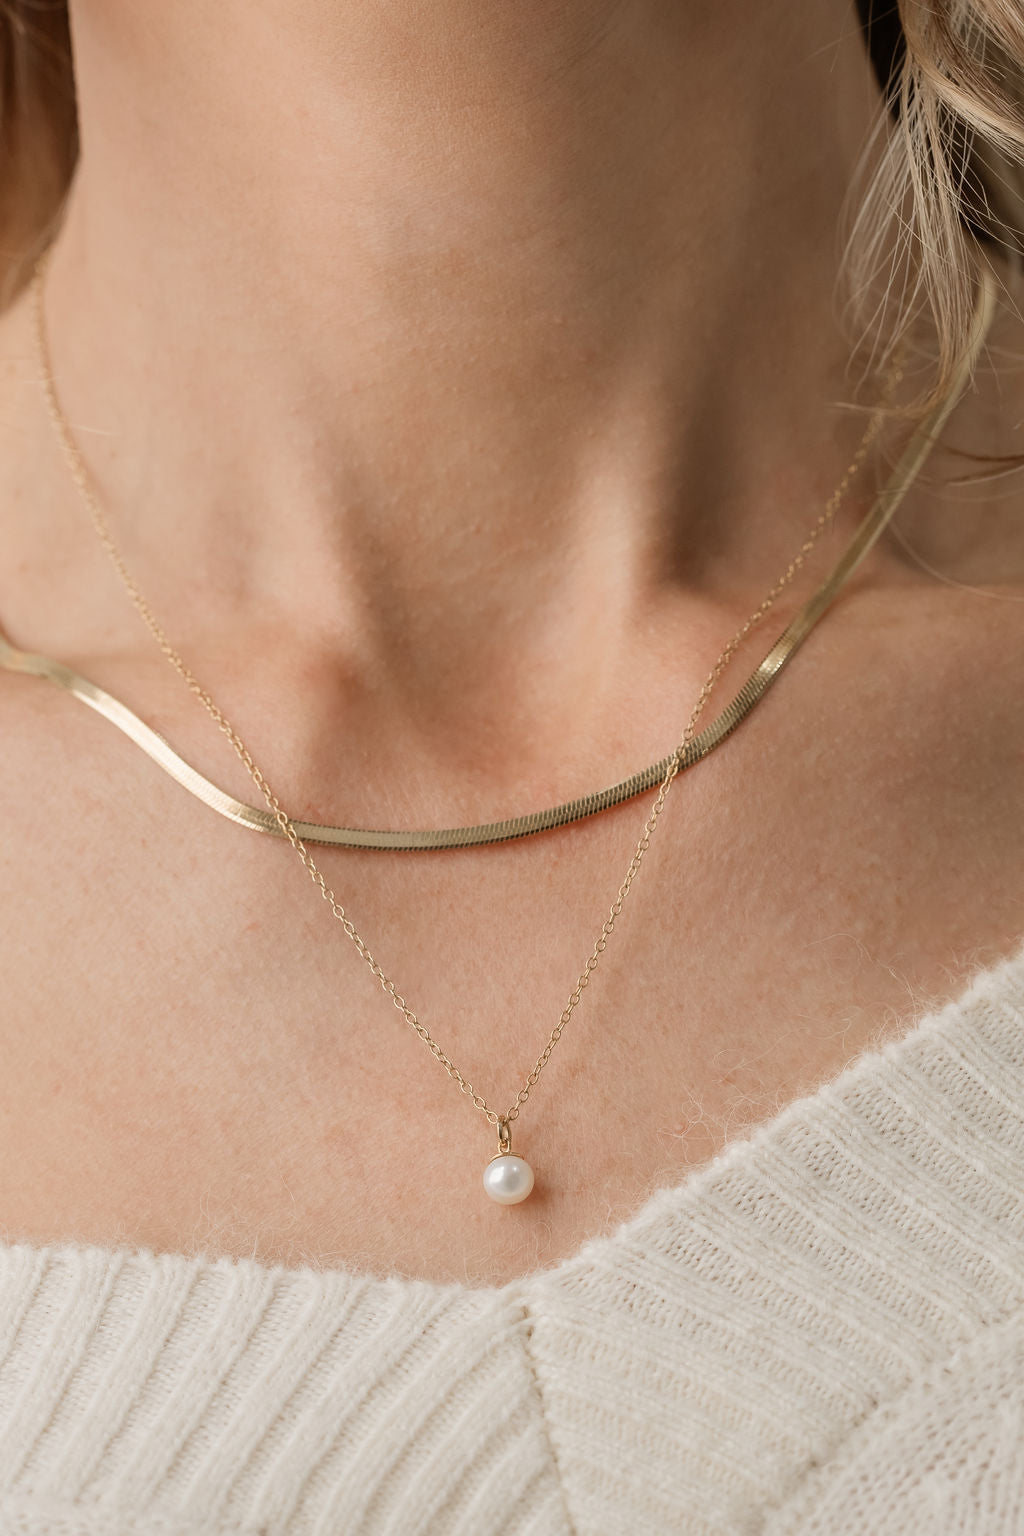 gold herringbone necklace and pearl pendant necklace